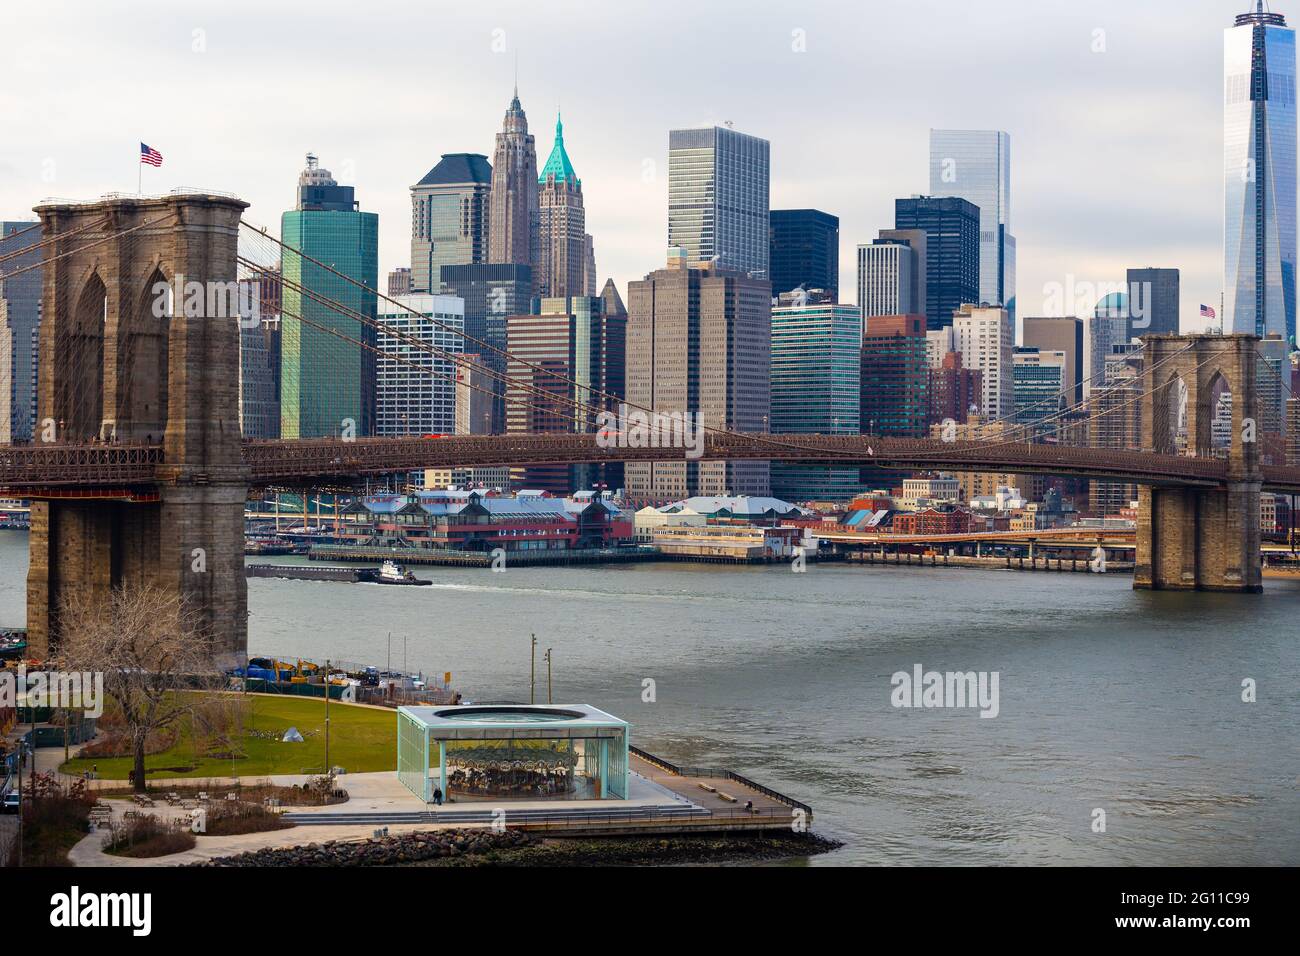 Brooklyn Bridge over East River, connecting Brooklyn with Manhattan, New York city. Stock Photo